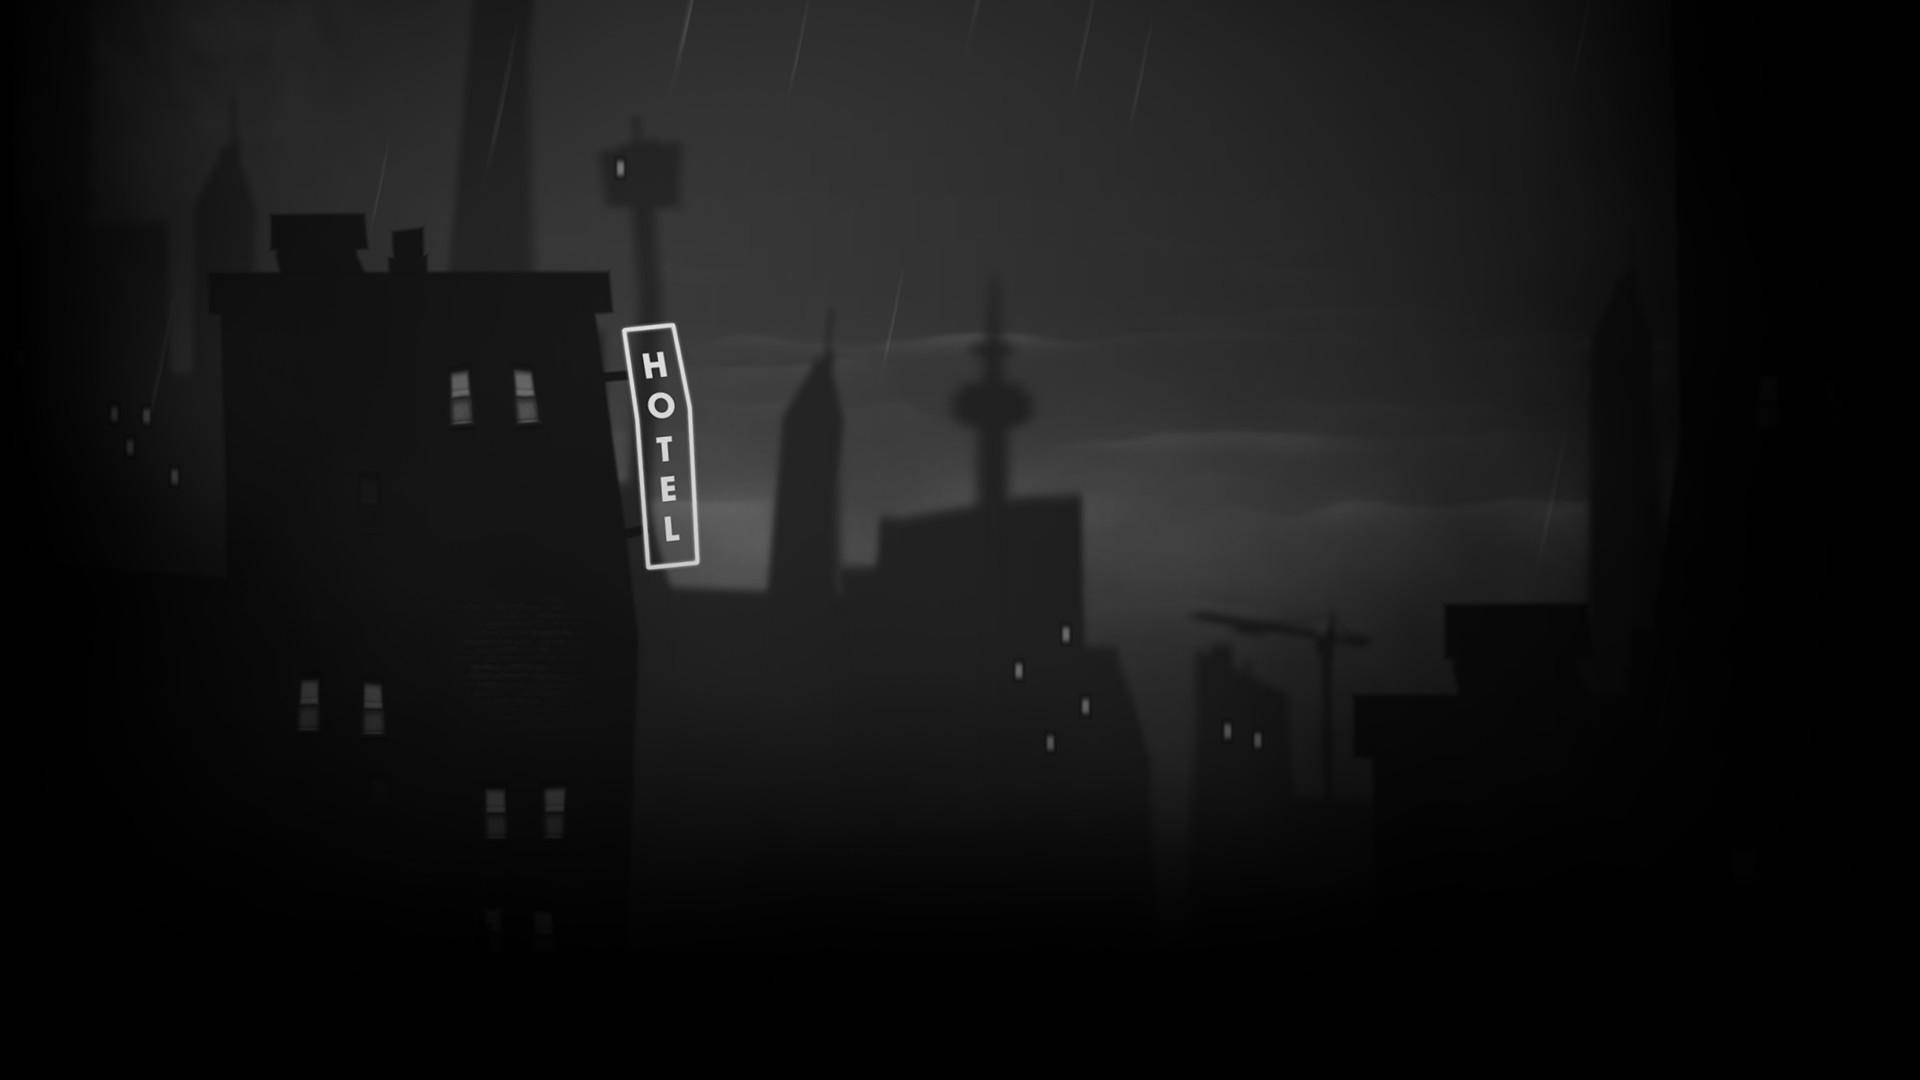 Simple Black City With Hotel Sign Background